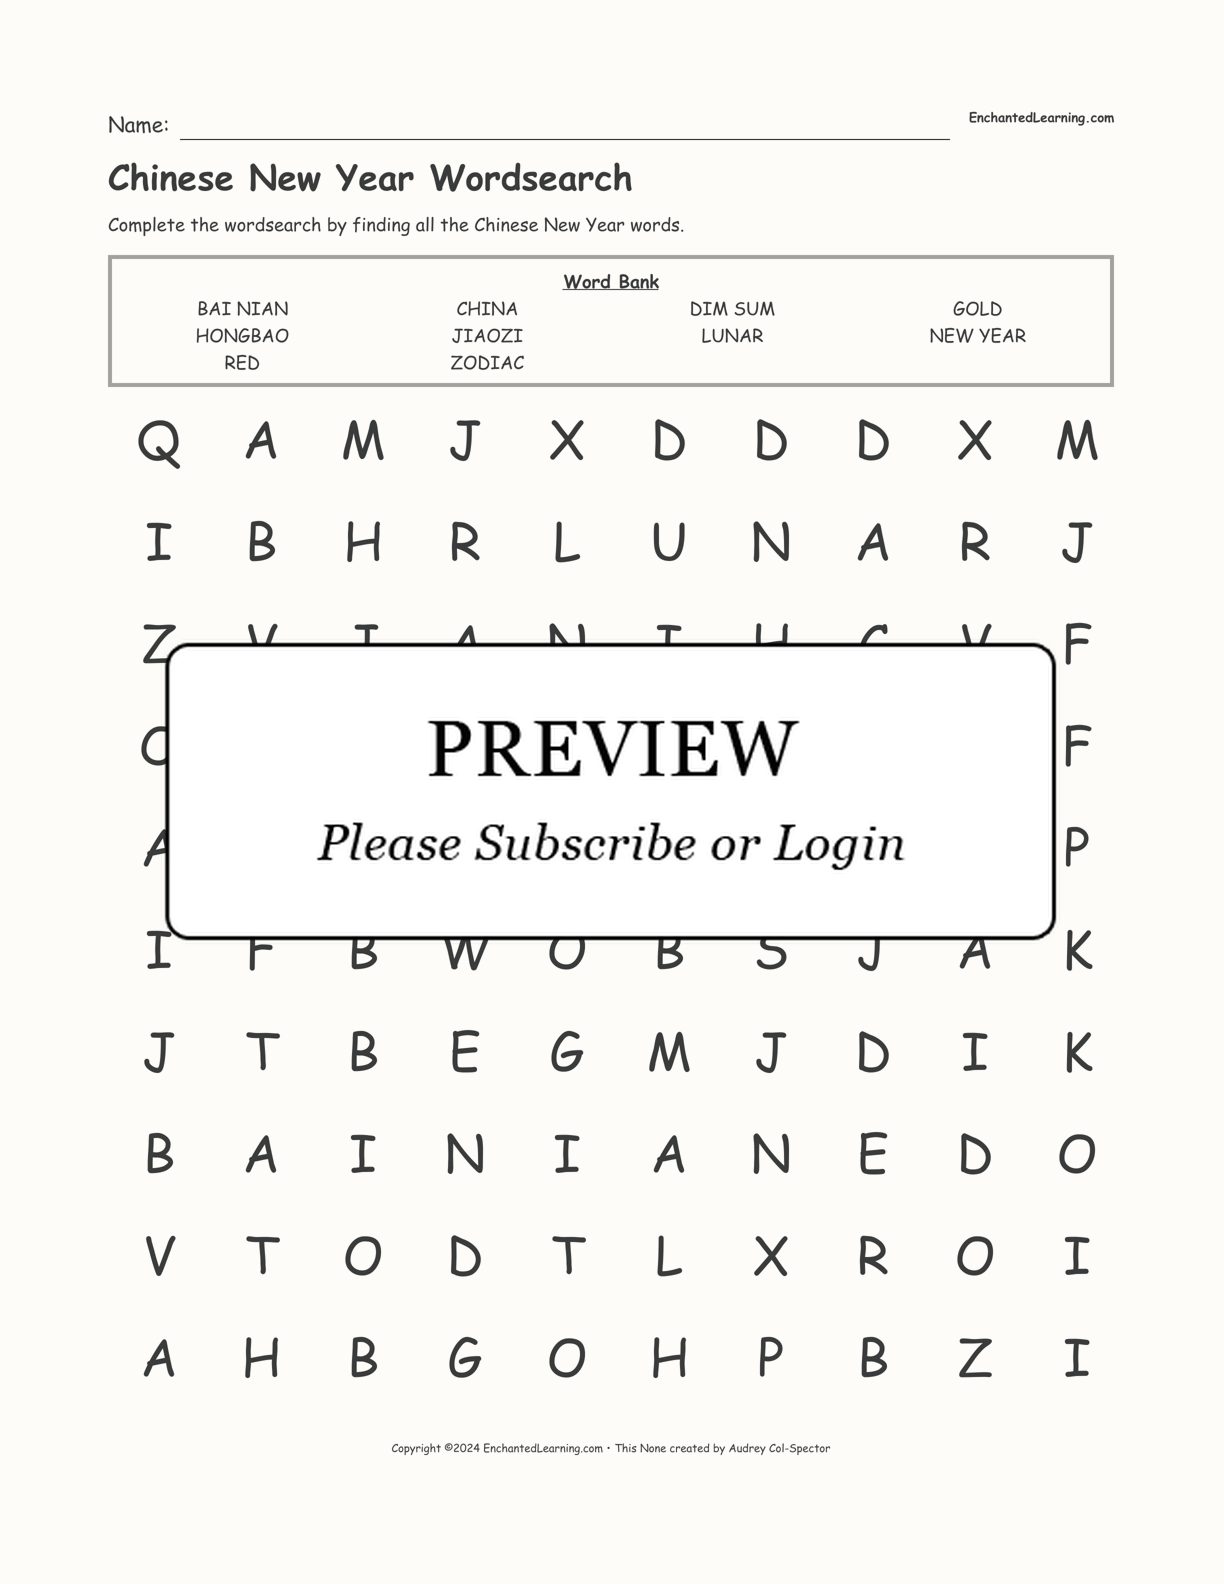 Chinese New Year Wordsearch interactive worksheet page 1